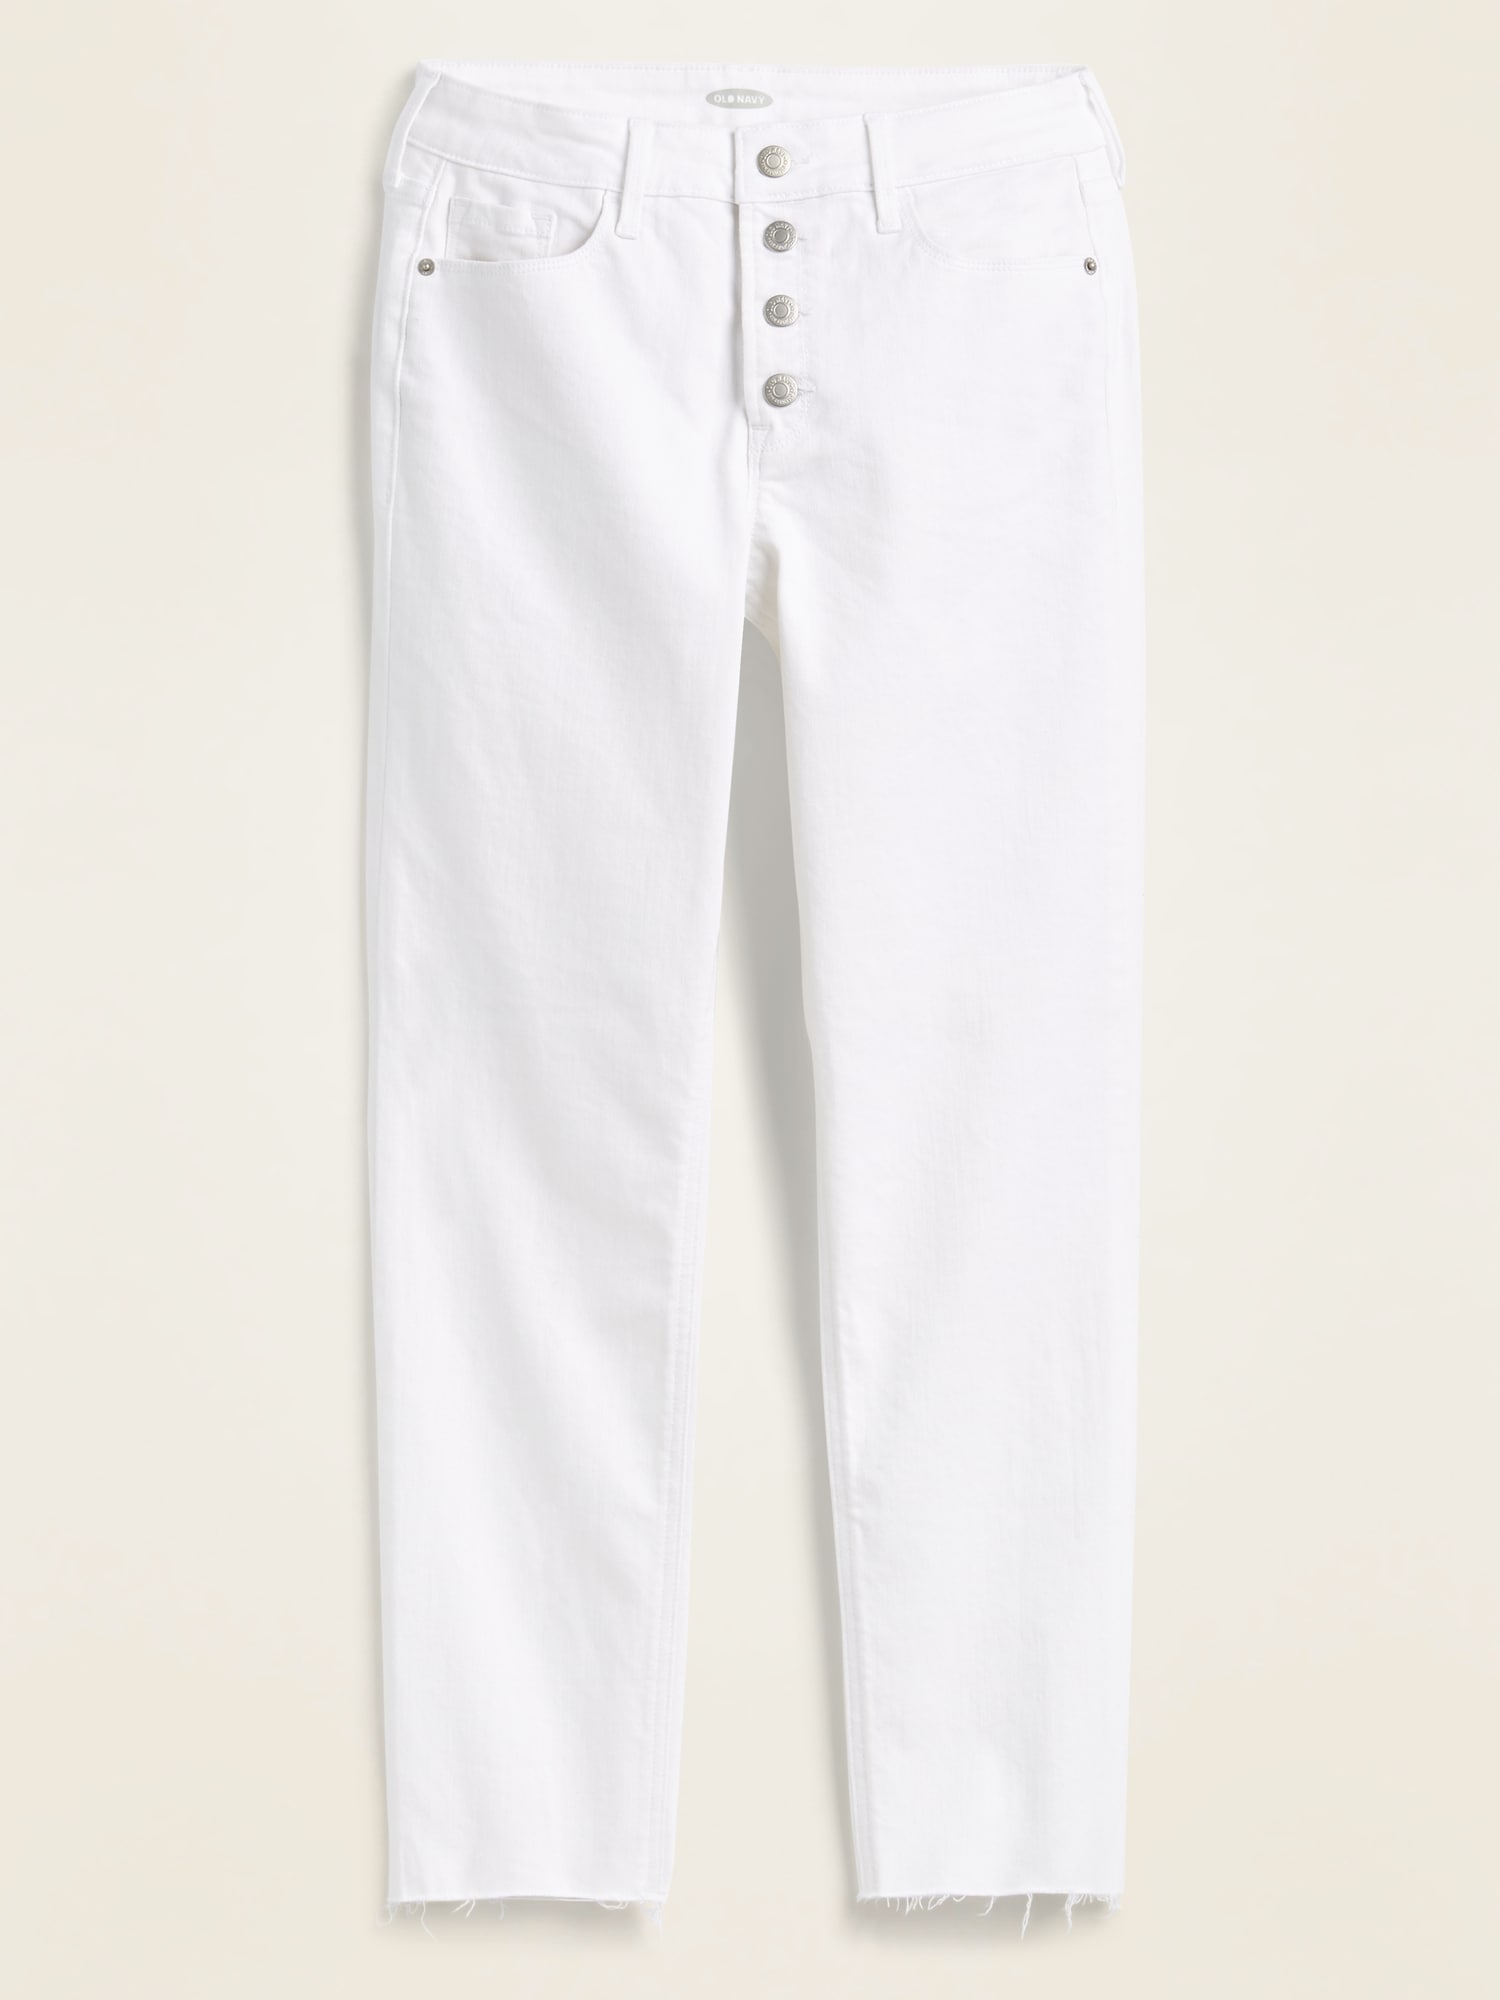 white button fly jeans